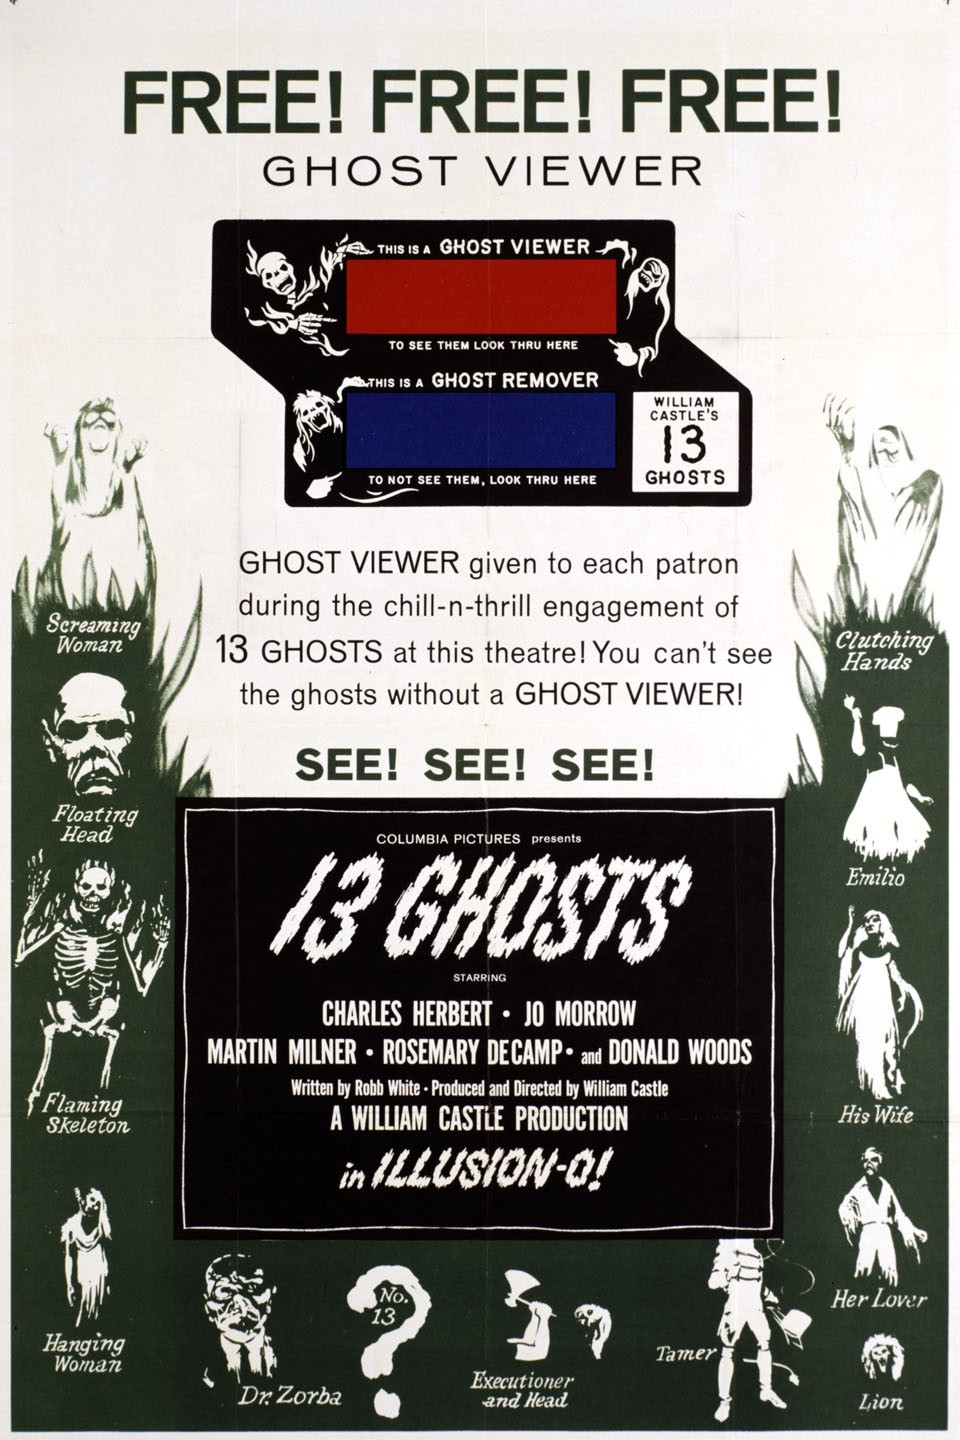 The Little Ghost - Rotten Tomatoes